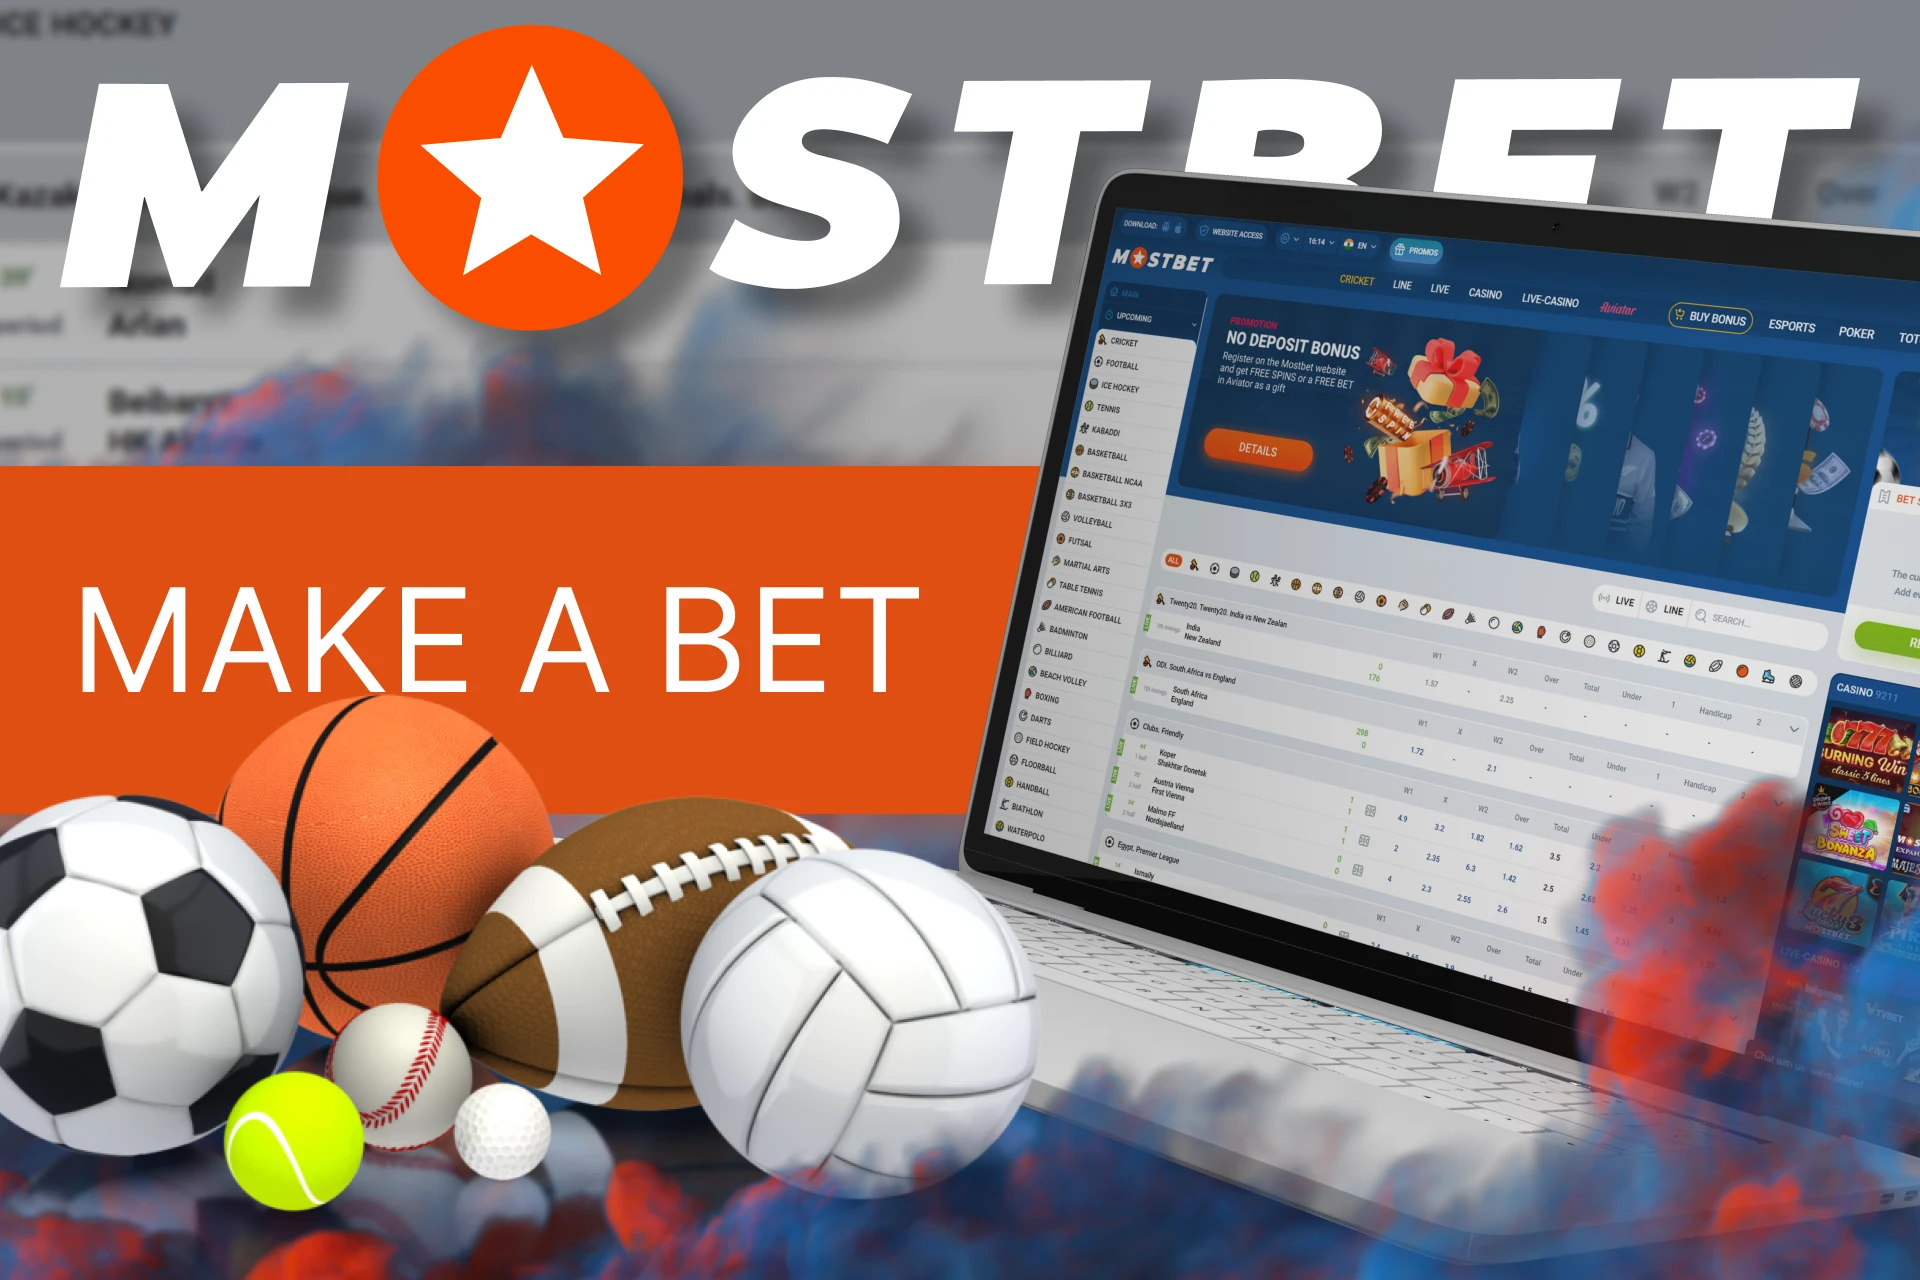 At Mostbet you can bet not only on rugby, but also on other sports.